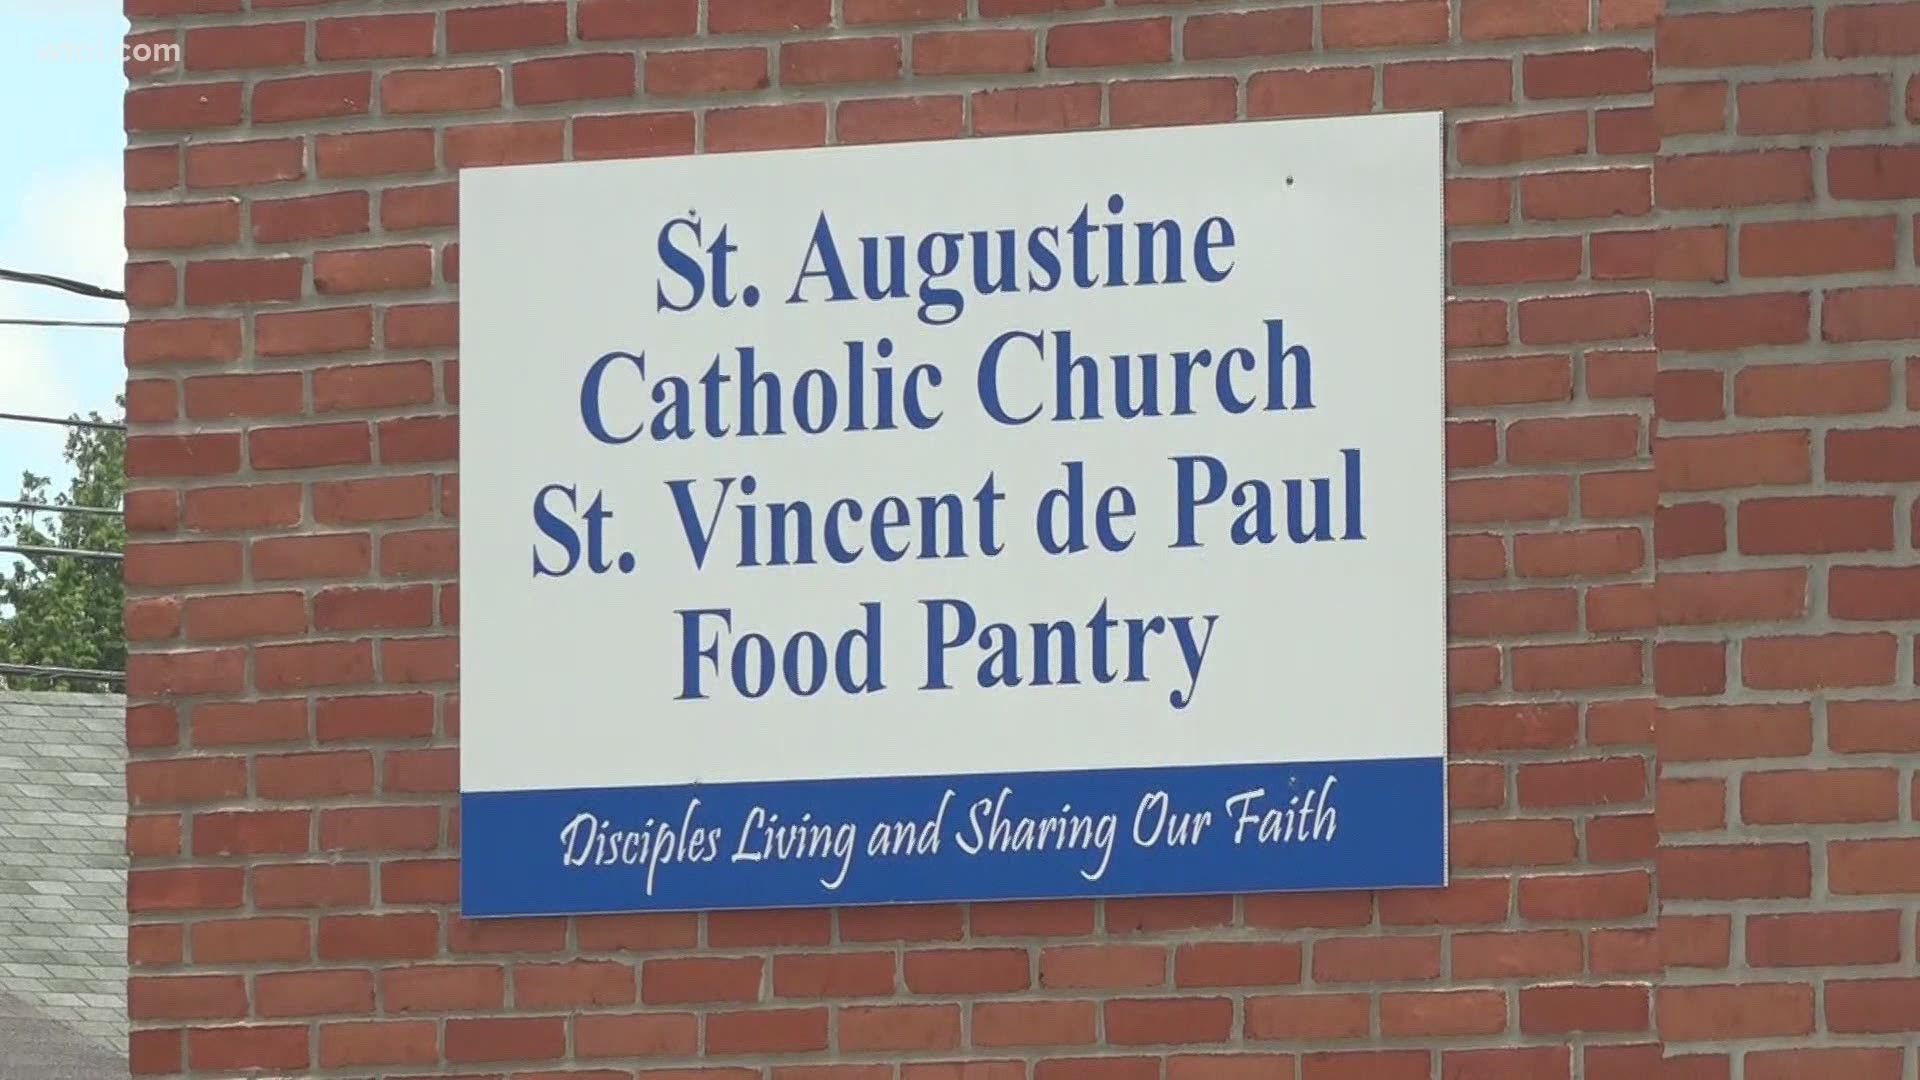 The pantry is now located inside of the new St. Augustine Catholic church ministry center